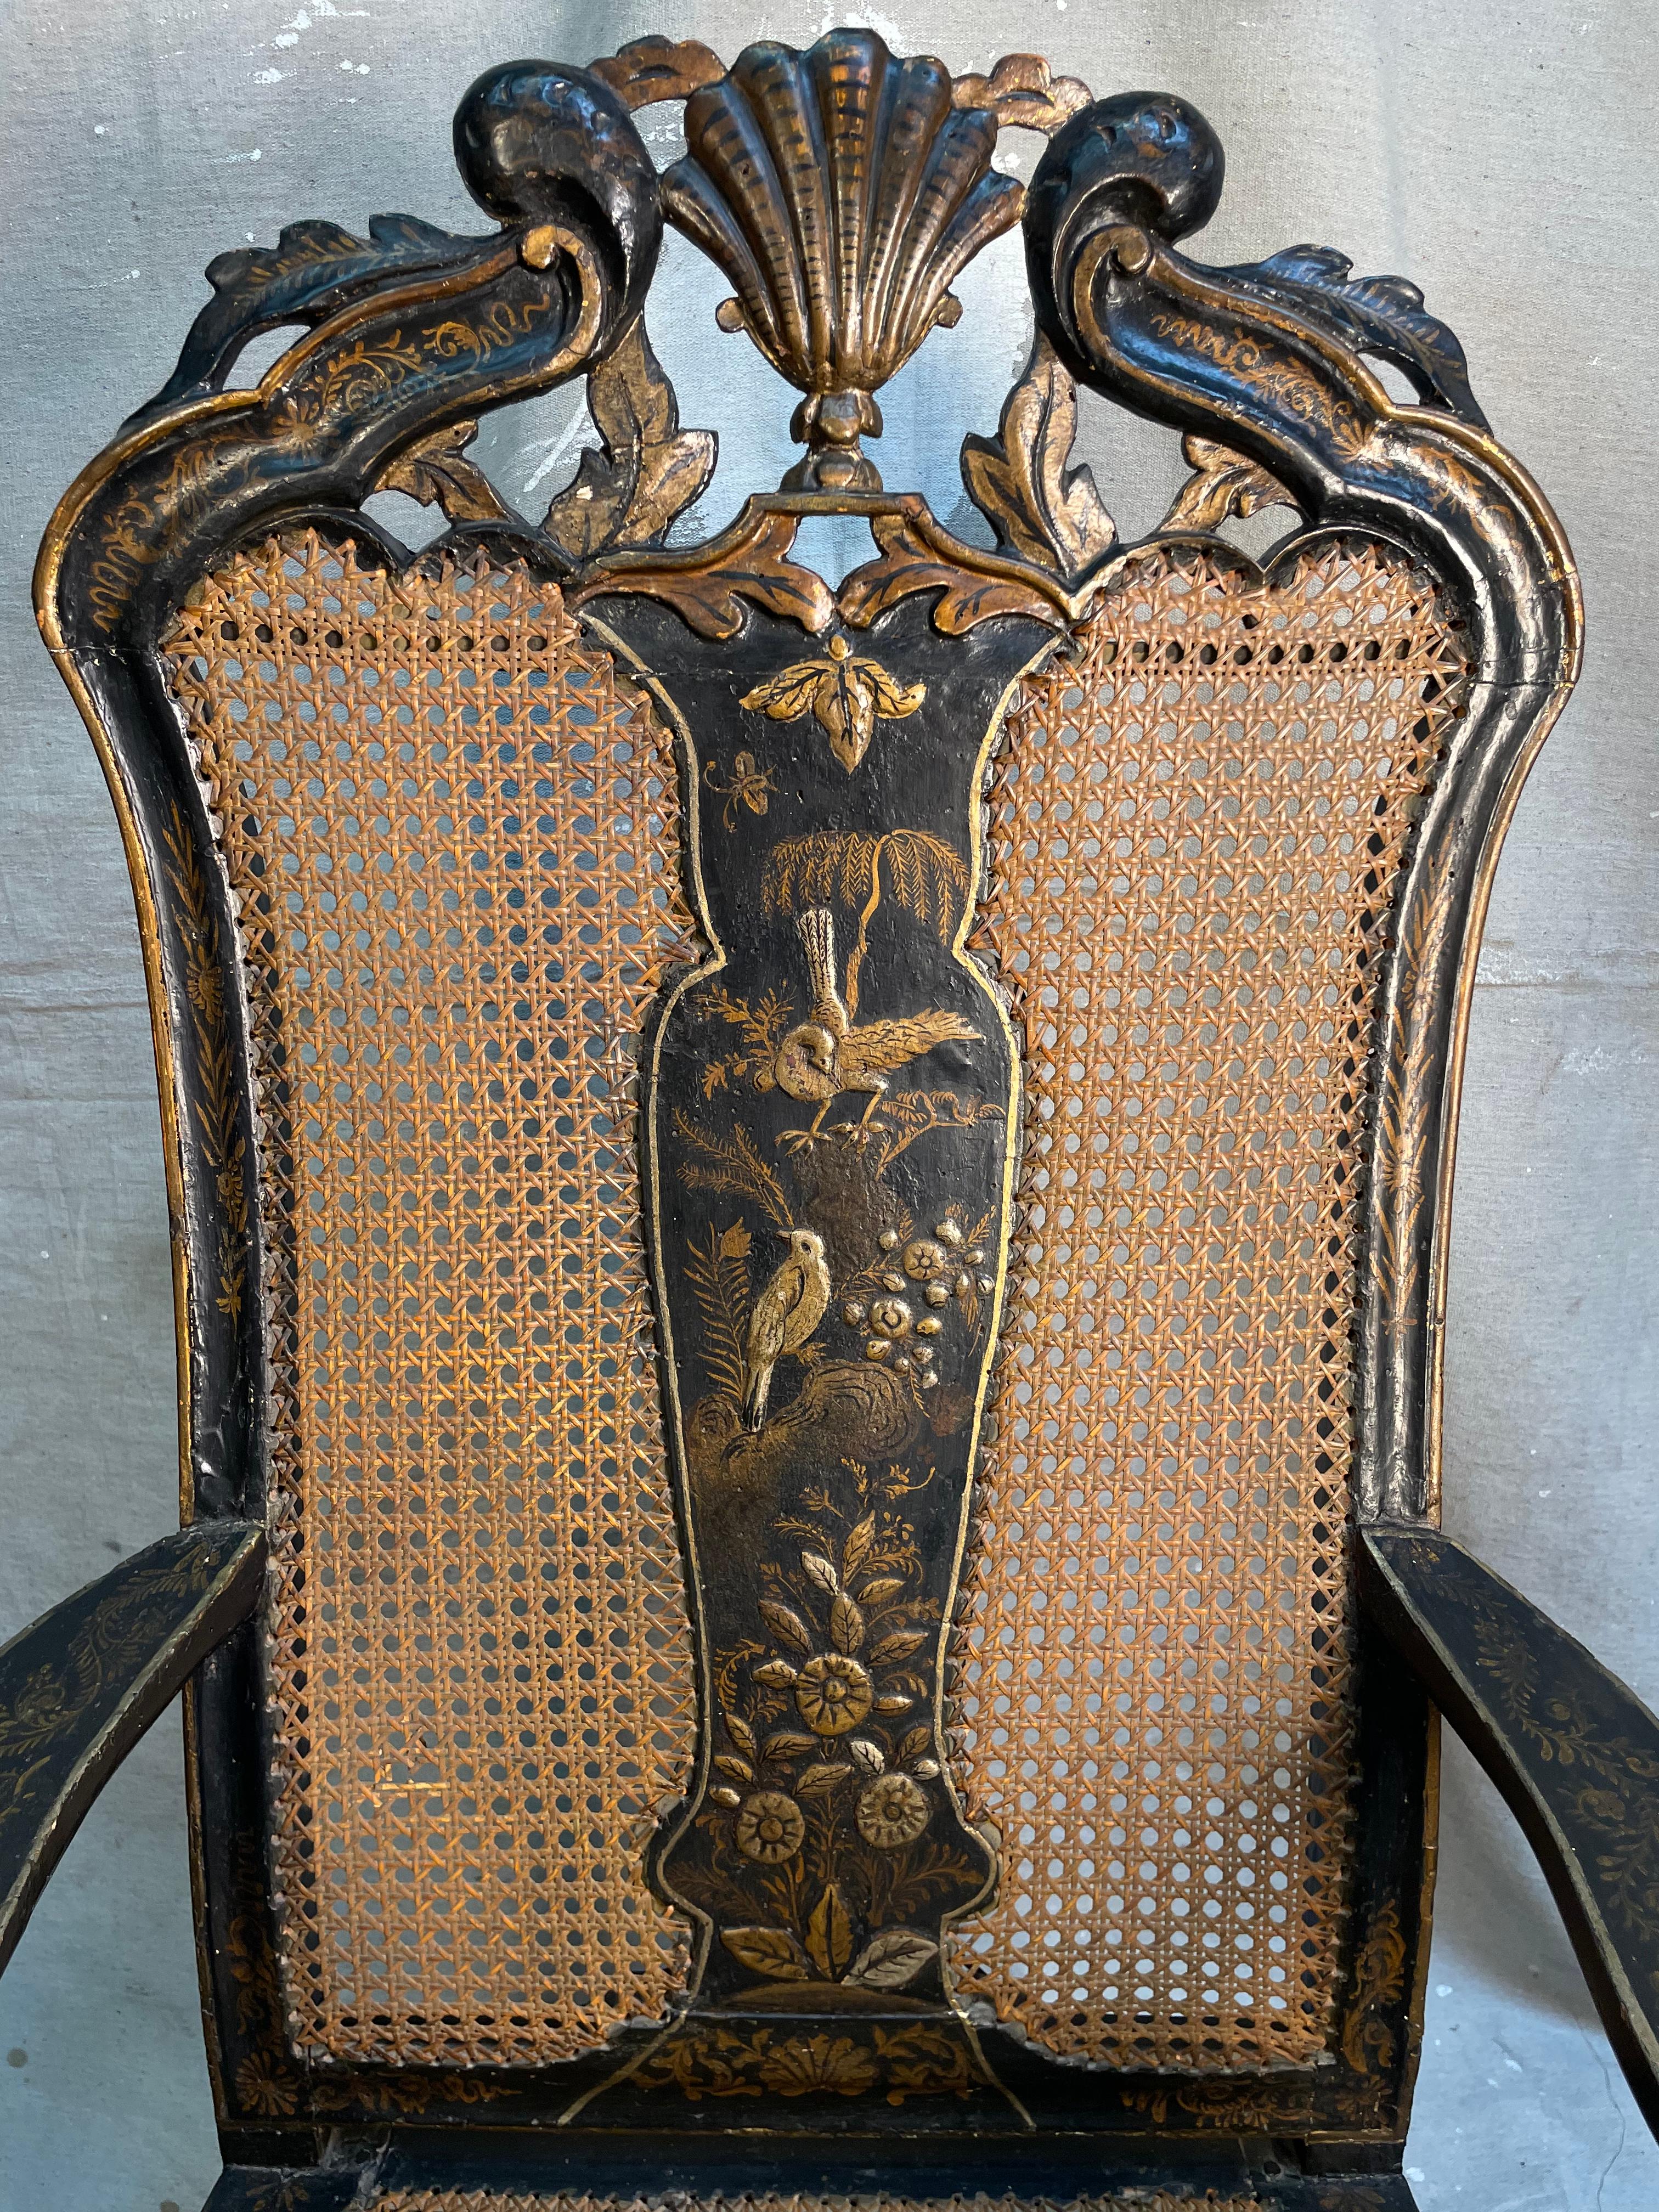 This 19th century English Chinoiserie Armchair is in the Queen Ann style. It is hand painted, hand carved, and caned. It is decorated in beautiful scenes of foliage, birds, and shells in shimmering gold leaf; giving us a dancing energy of a tropical